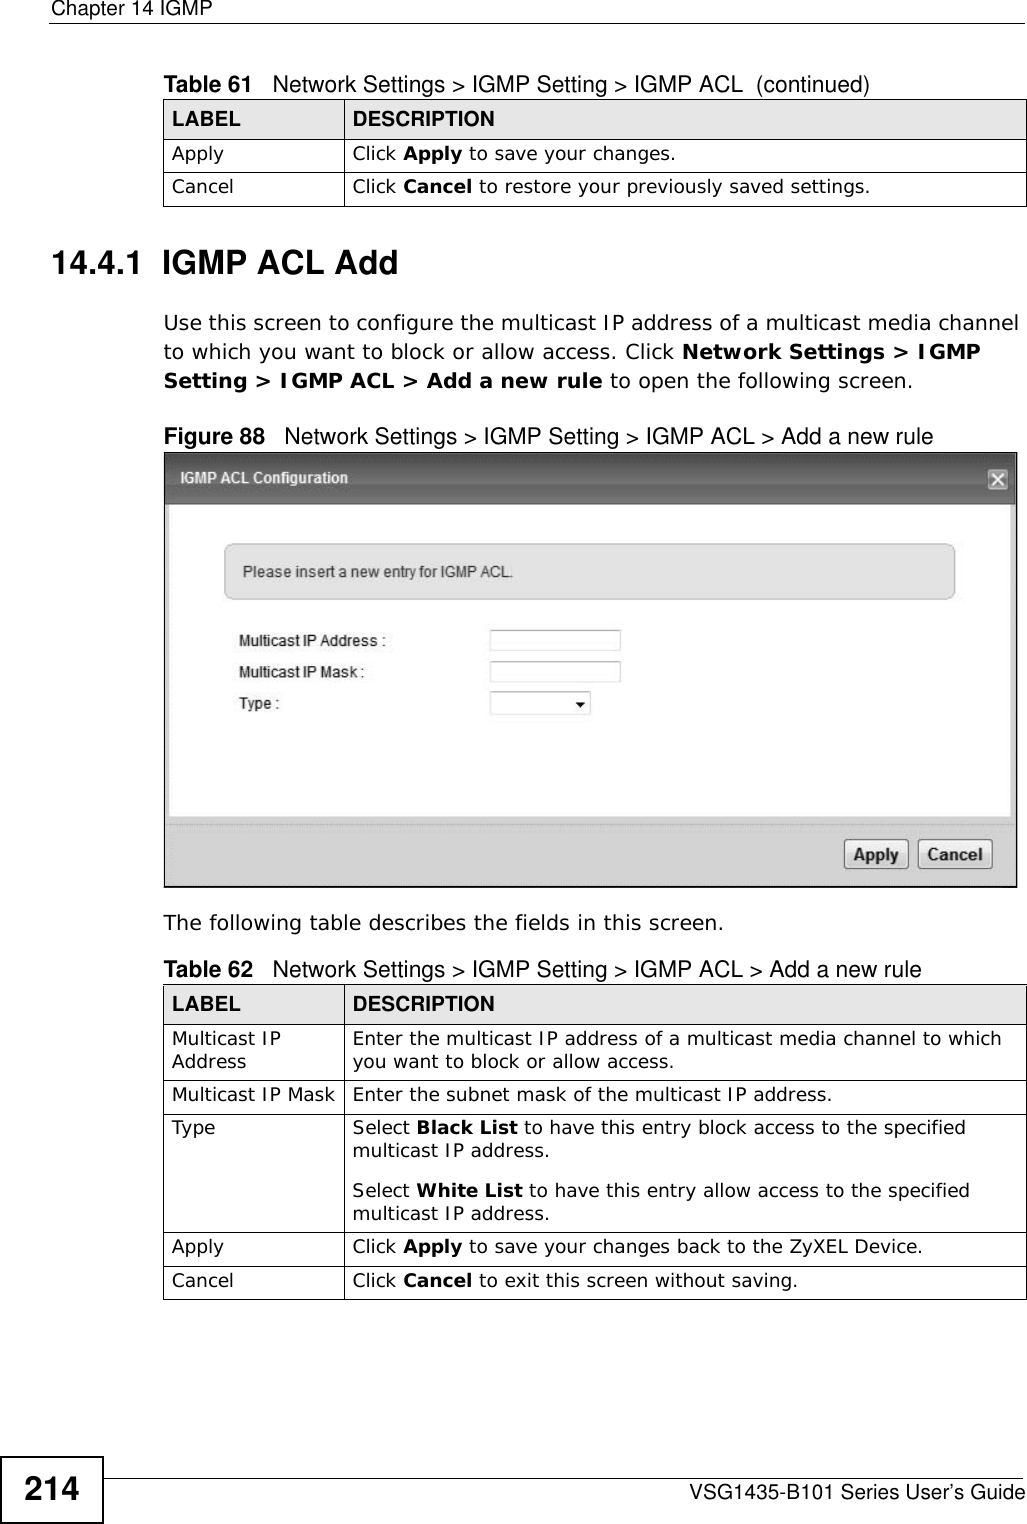 Chapter 14 IGMPVSG1435-B101 Series User’s Guide21414.4.1  IGMP ACL AddUse this screen to configure the multicast IP address of a multicast media channel to which you want to block or allow access. Click Network Settings &gt; IGMP Setting &gt; IGMP ACL &gt; Add a new rule to open the following screen. Figure 88   Network Settings &gt; IGMP Setting &gt; IGMP ACL &gt; Add a new rule  The following table describes the fields in this screen.Apply Click Apply to save your changes.Cancel Click Cancel to restore your previously saved settings.Table 61   Network Settings &gt; IGMP Setting &gt; IGMP ACL  (continued)LABEL DESCRIPTIONTable 62   Network Settings &gt; IGMP Setting &gt; IGMP ACL &gt; Add a new rule LABEL DESCRIPTIONMulticast IP Address Enter the multicast IP address of a multicast media channel to which you want to block or allow access.Multicast IP Mask Enter the subnet mask of the multicast IP address.Type Select Black List to have this entry block access to the specified multicast IP address.Select White List to have this entry allow access to the specified multicast IP address.Apply Click Apply to save your changes back to the ZyXEL Device.Cancel Click Cancel to exit this screen without saving.